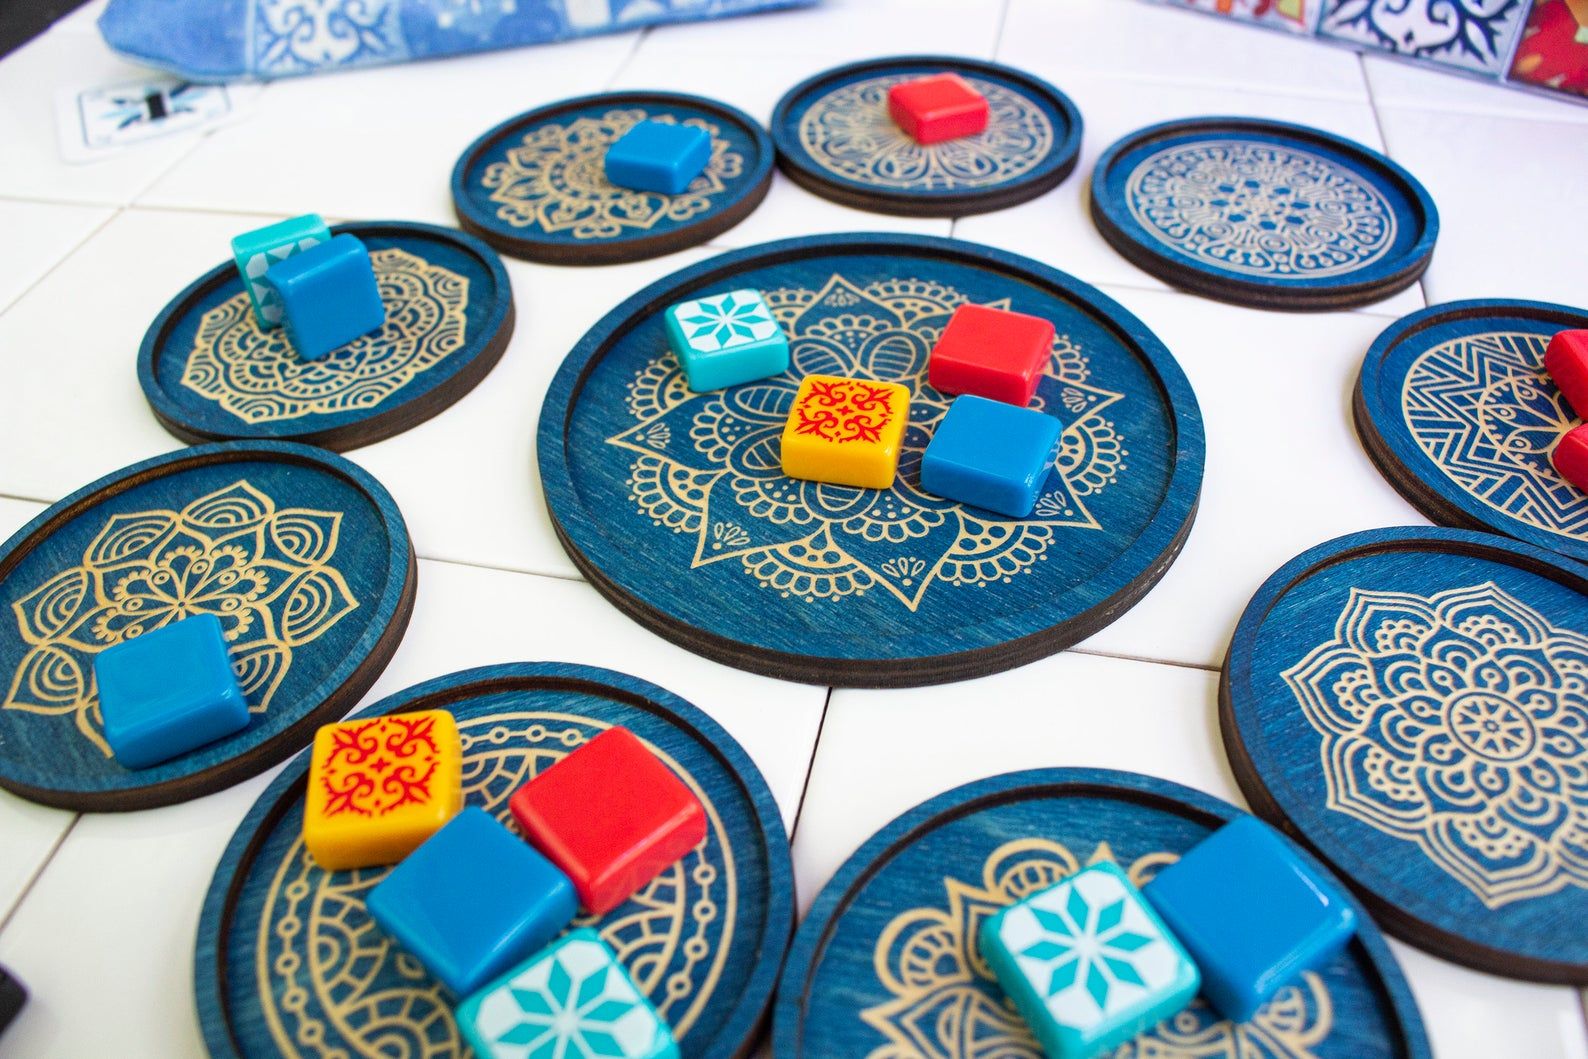 Game trays for Azul board game